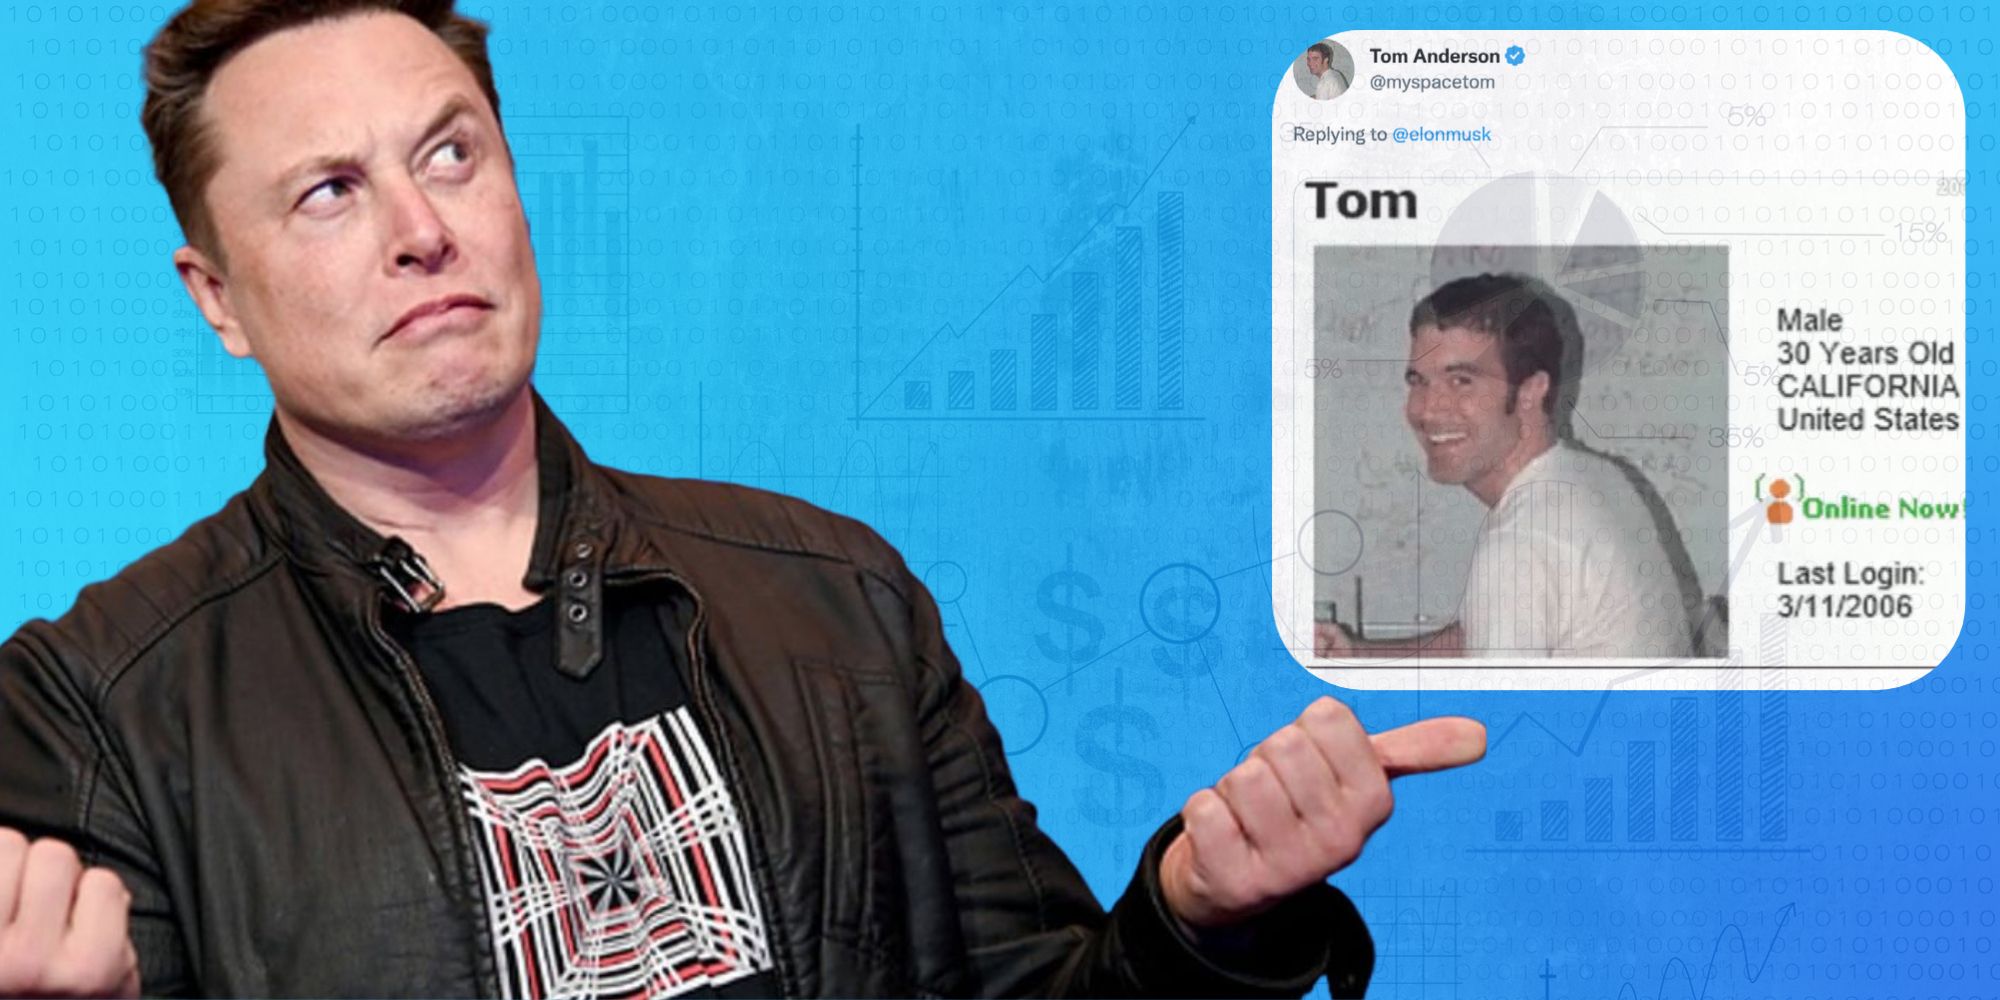 A cutout of Elon Musk against a blue background with faint calculations showing, beside a tweet from Myspace Tom